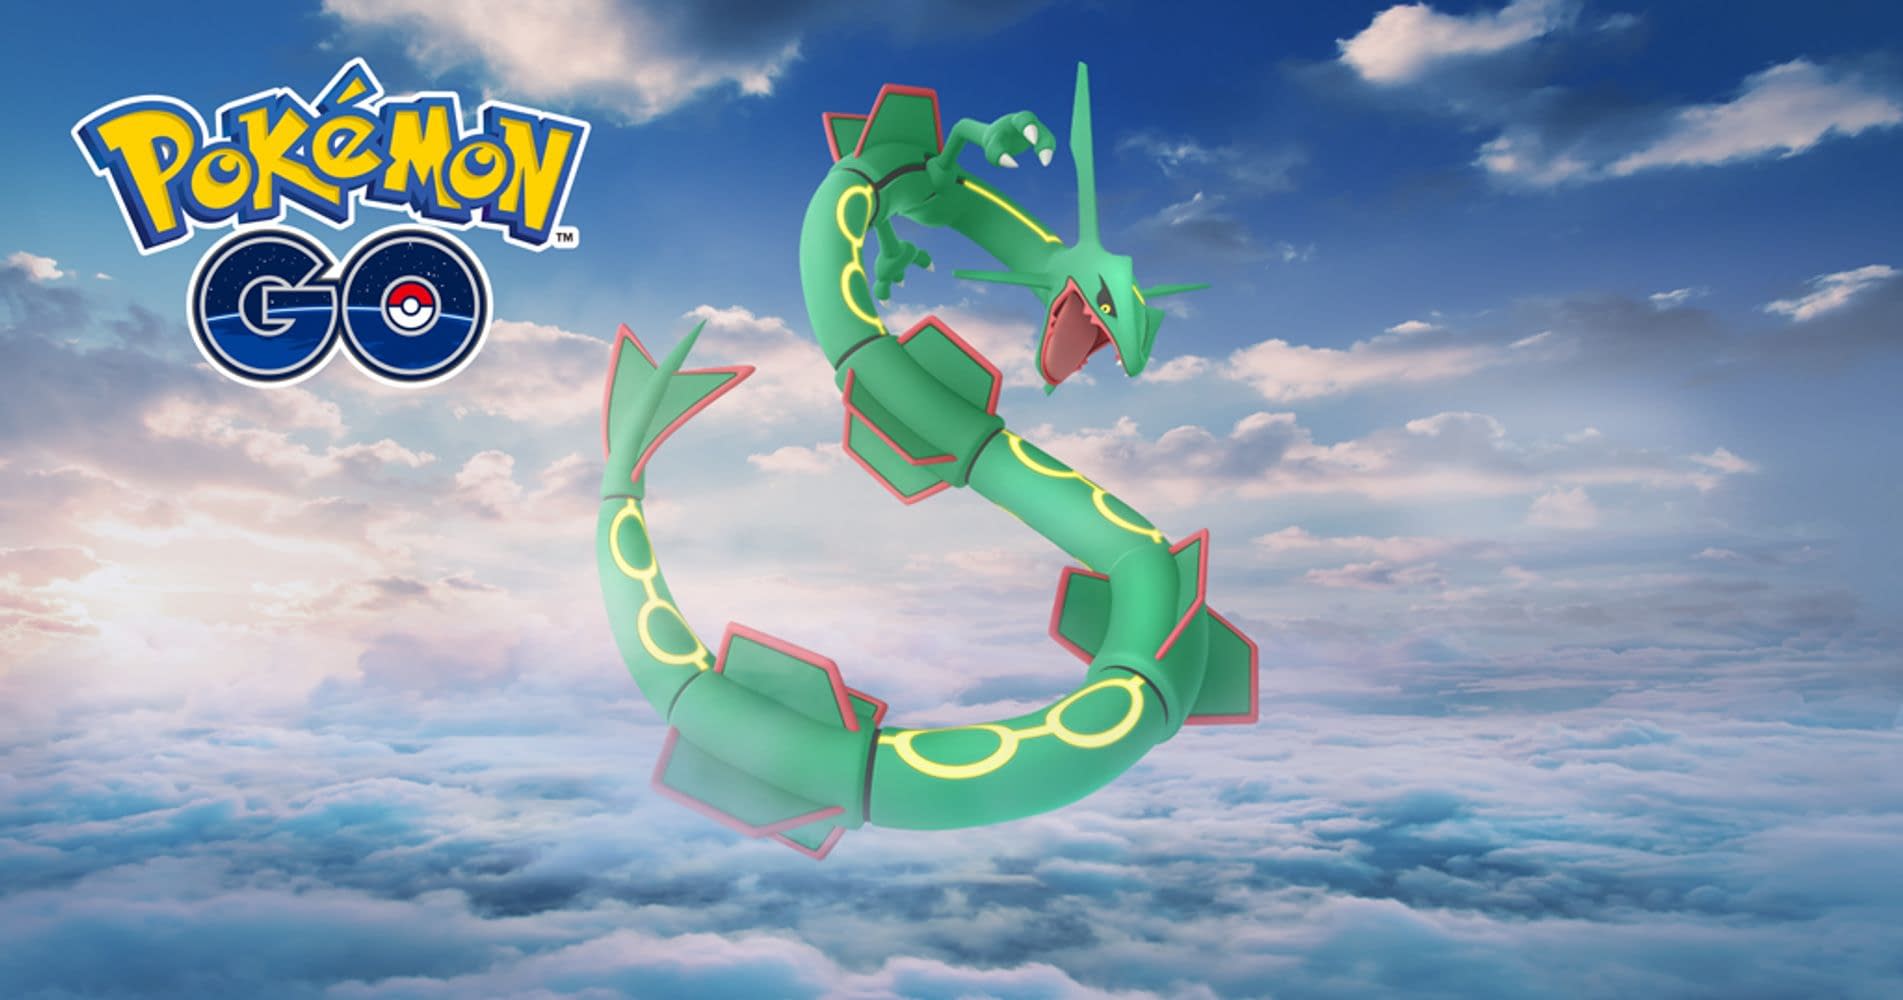 North Americans! Get your level 70 shiny Rayquaza now! (OR/AS only)